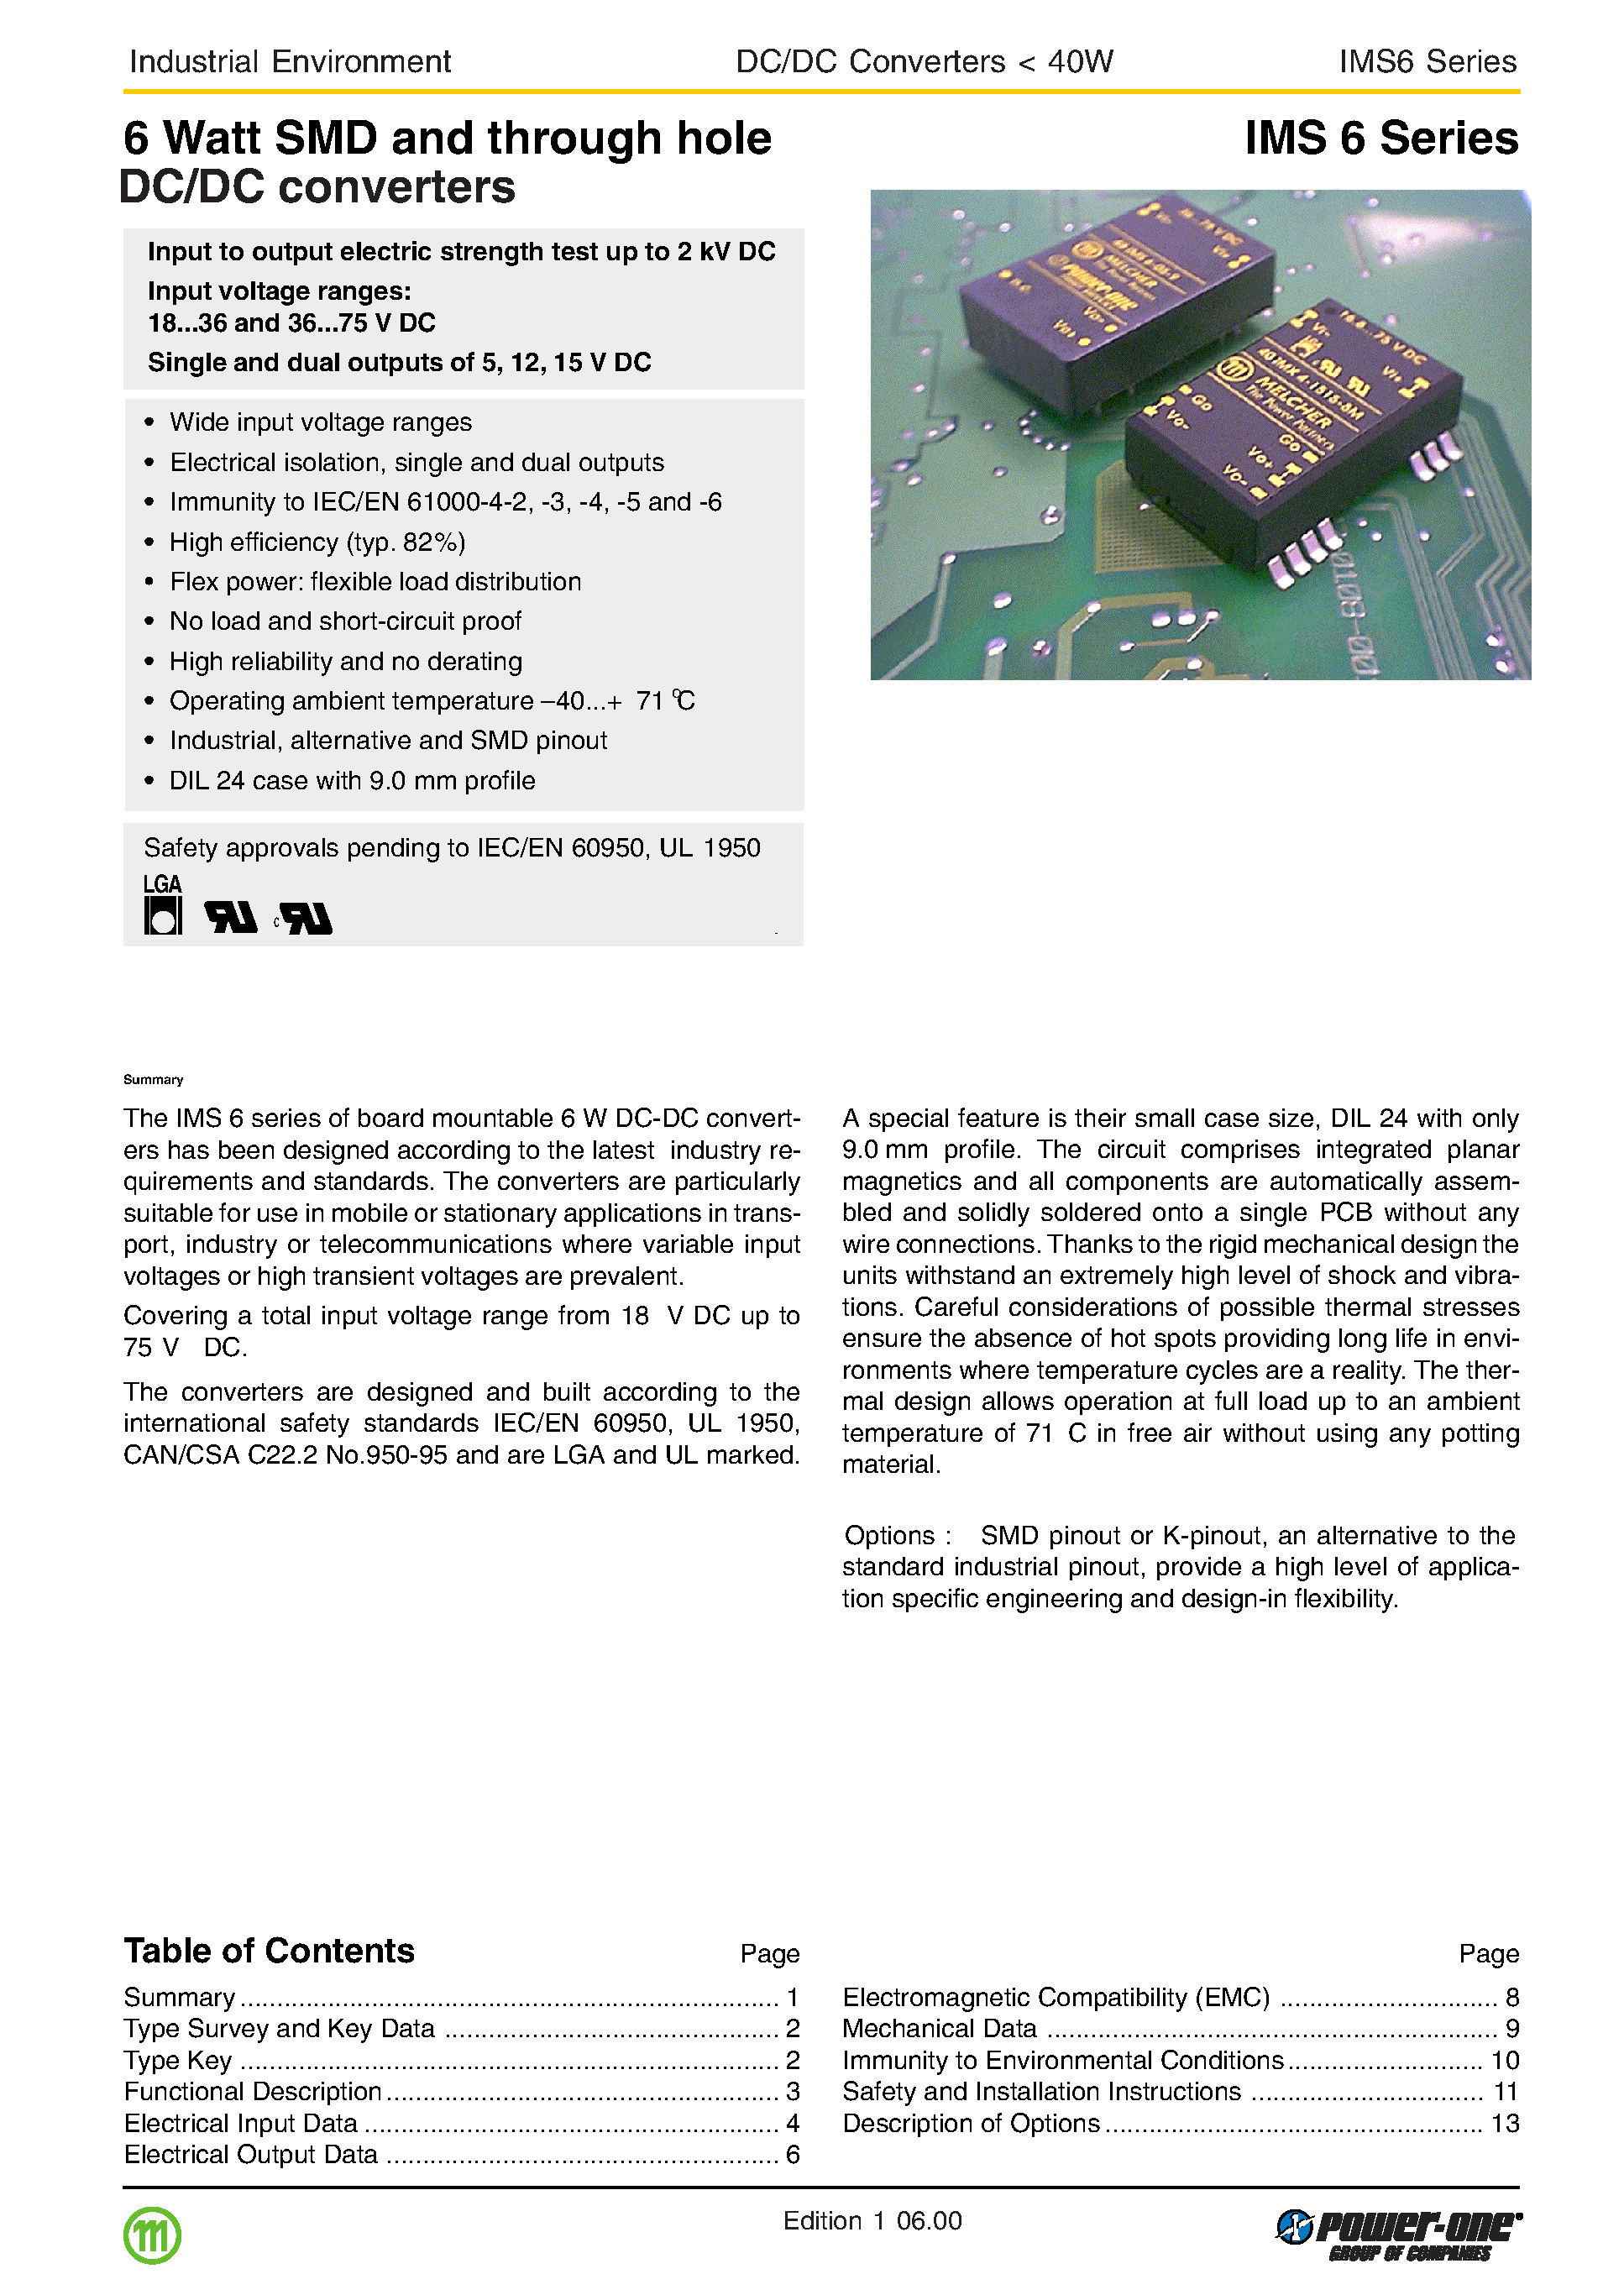 Datasheet 48IMS6-1212-9 - 6 Watt SMD and through hole DC/DC converters page 1